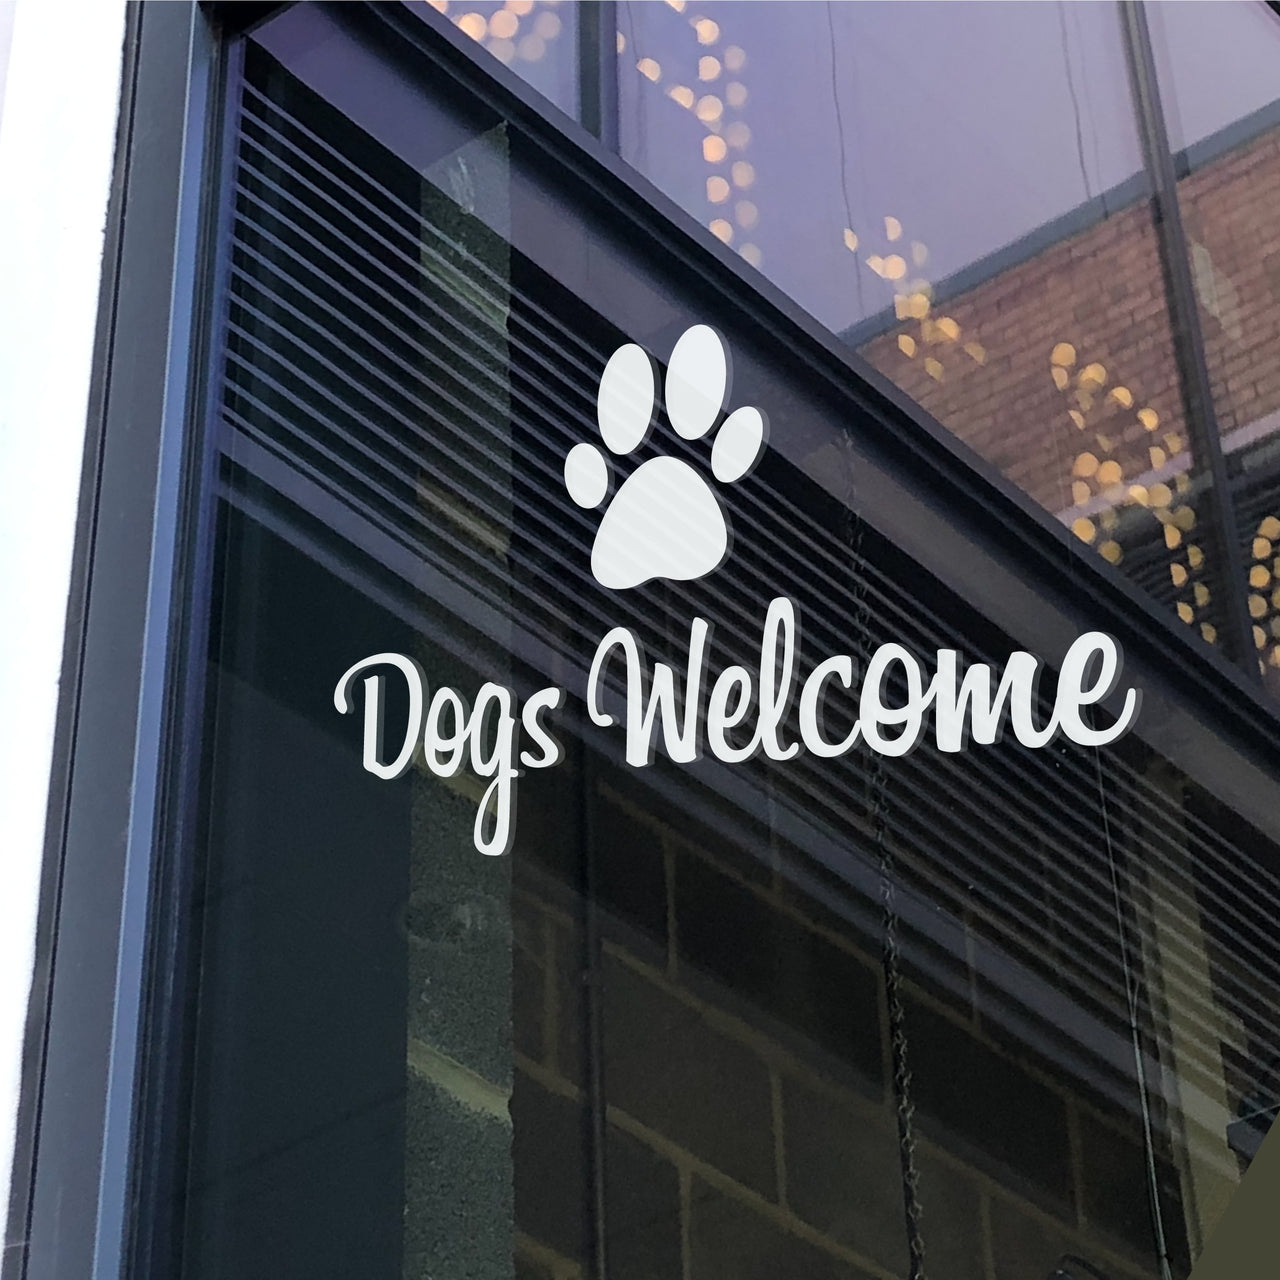 DOGS WELCOME - Business Shop Decal